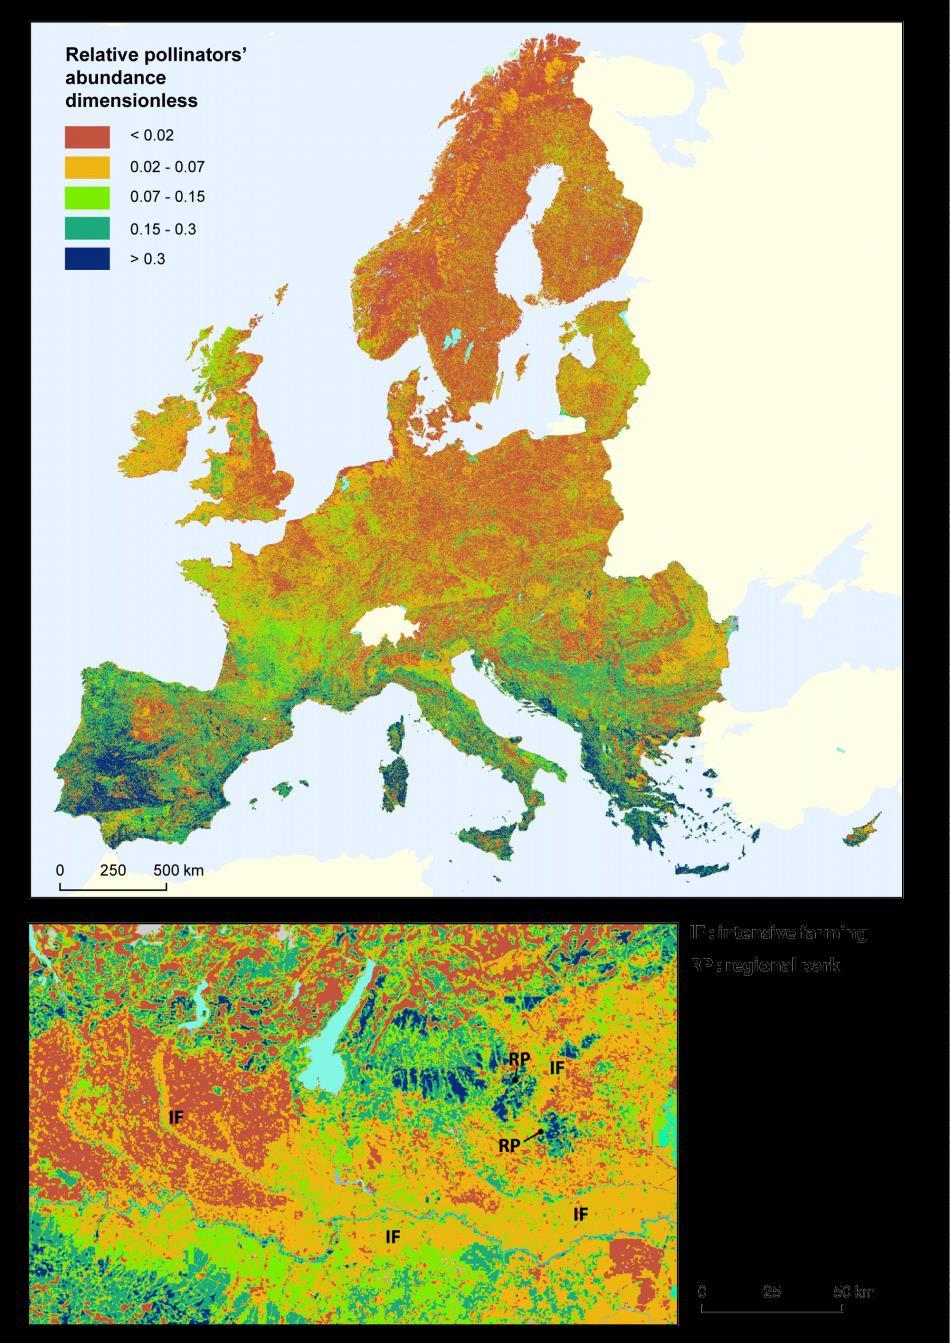 Mapping pollination gaps